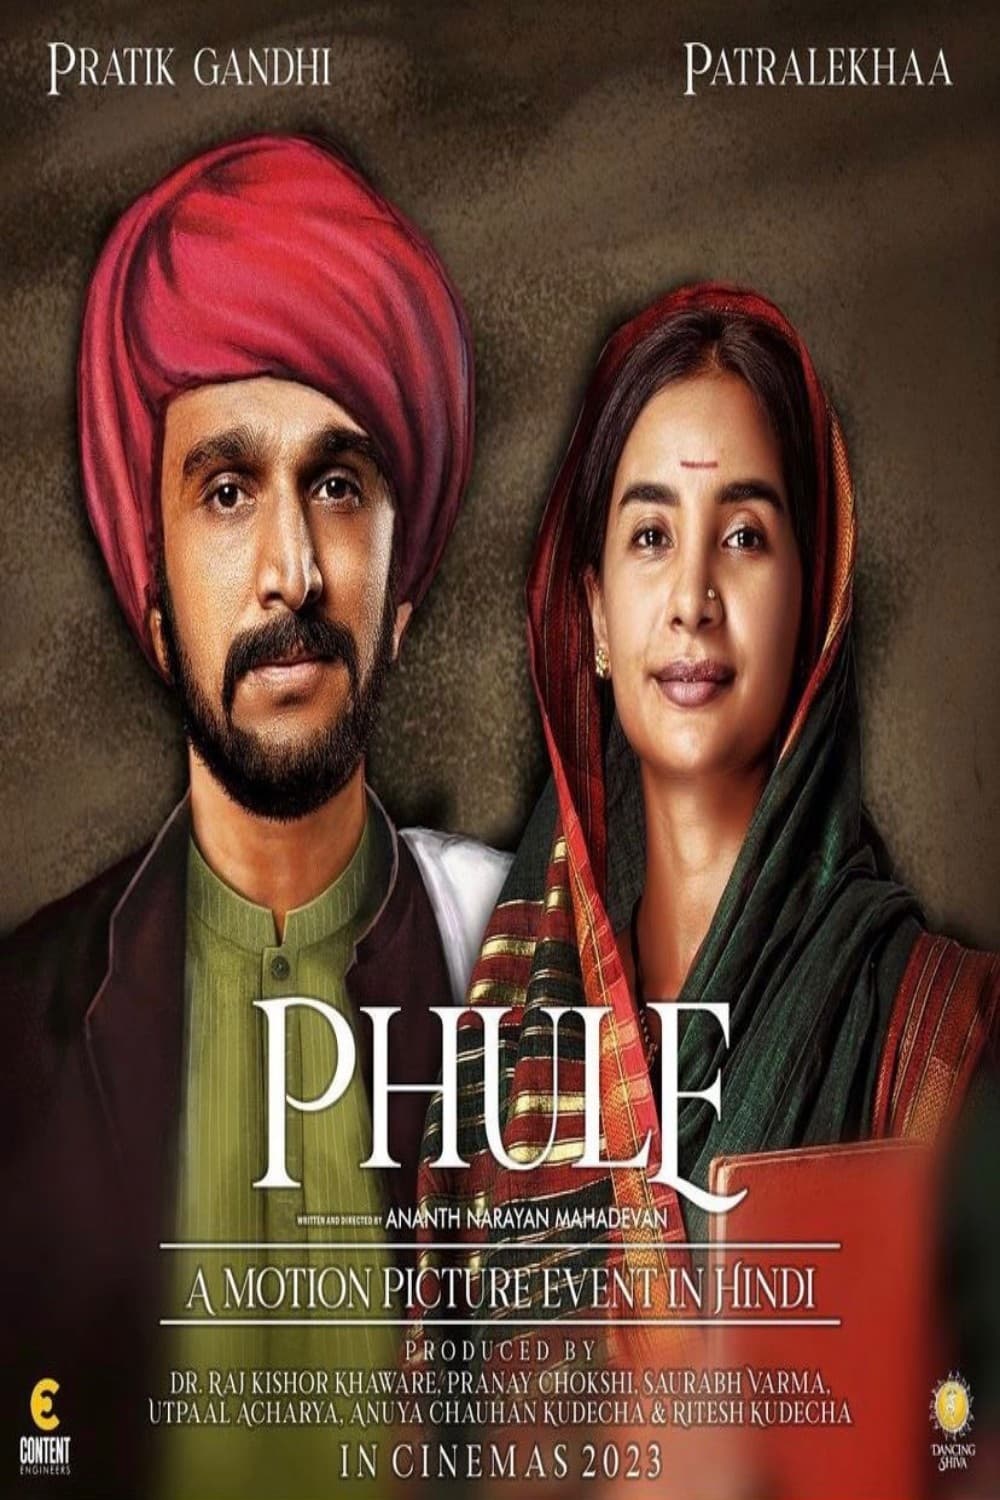 Poster for the movie "Phule"